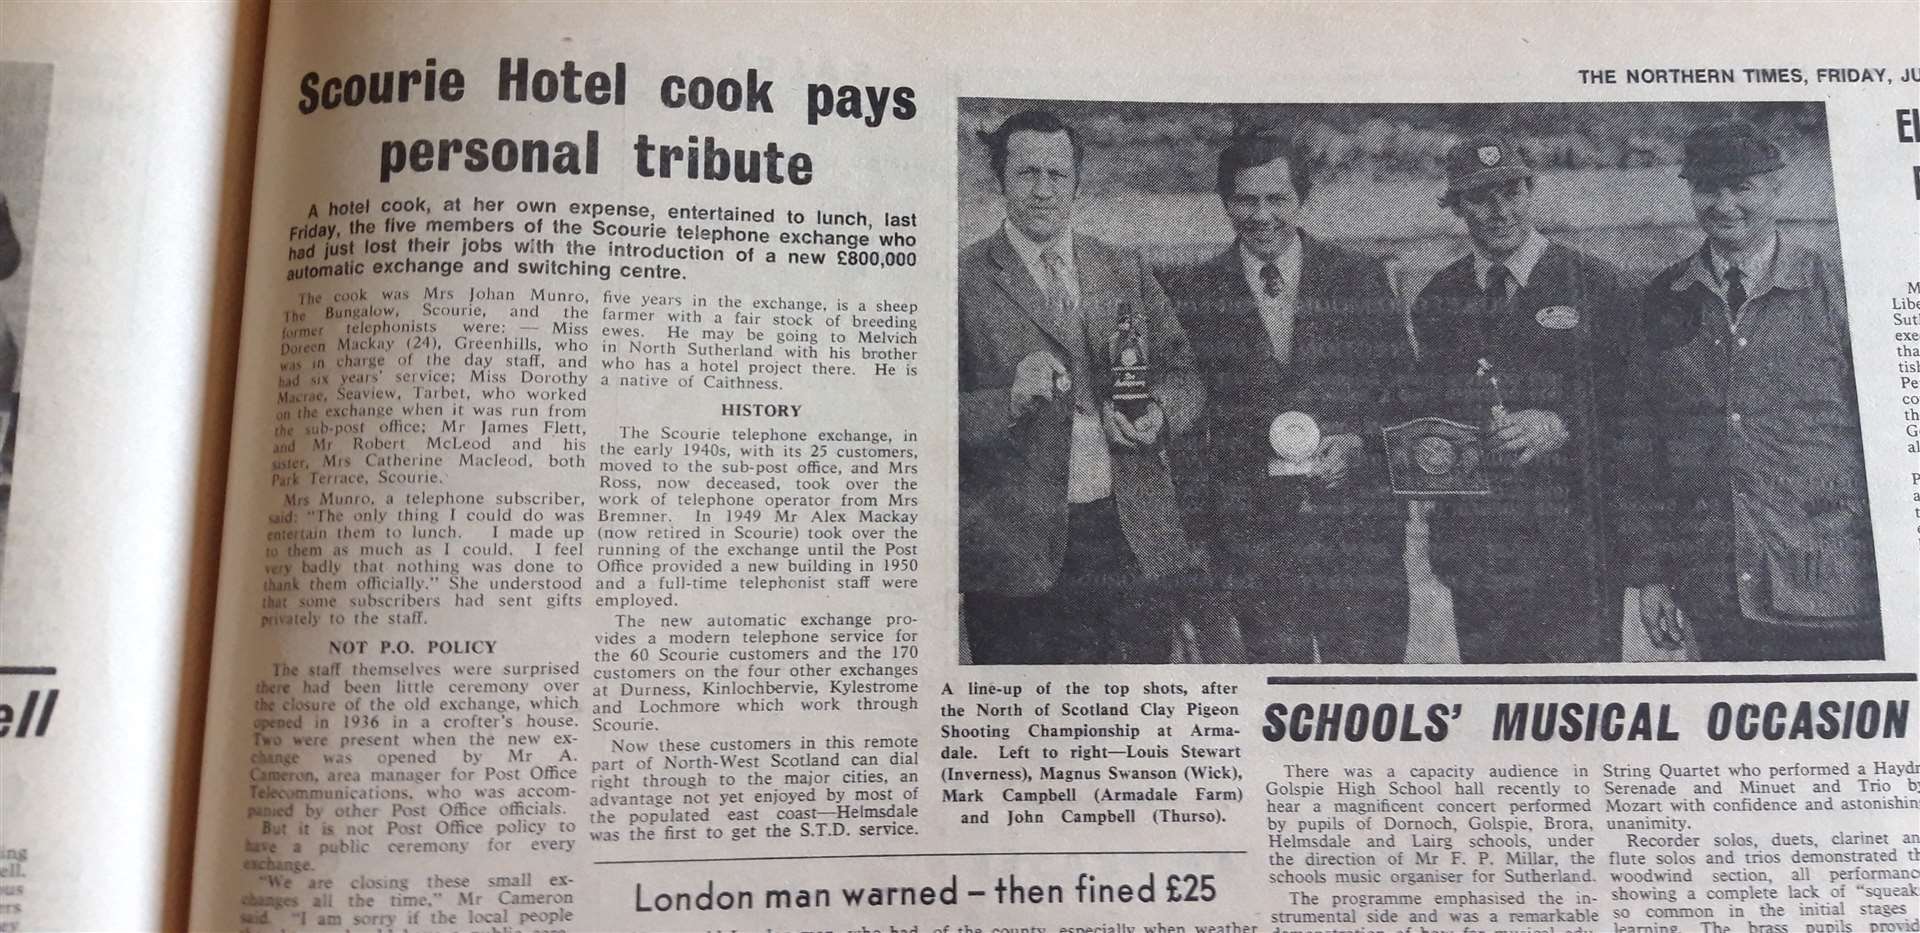 The June 2, 1973 edition of the Northern Times.